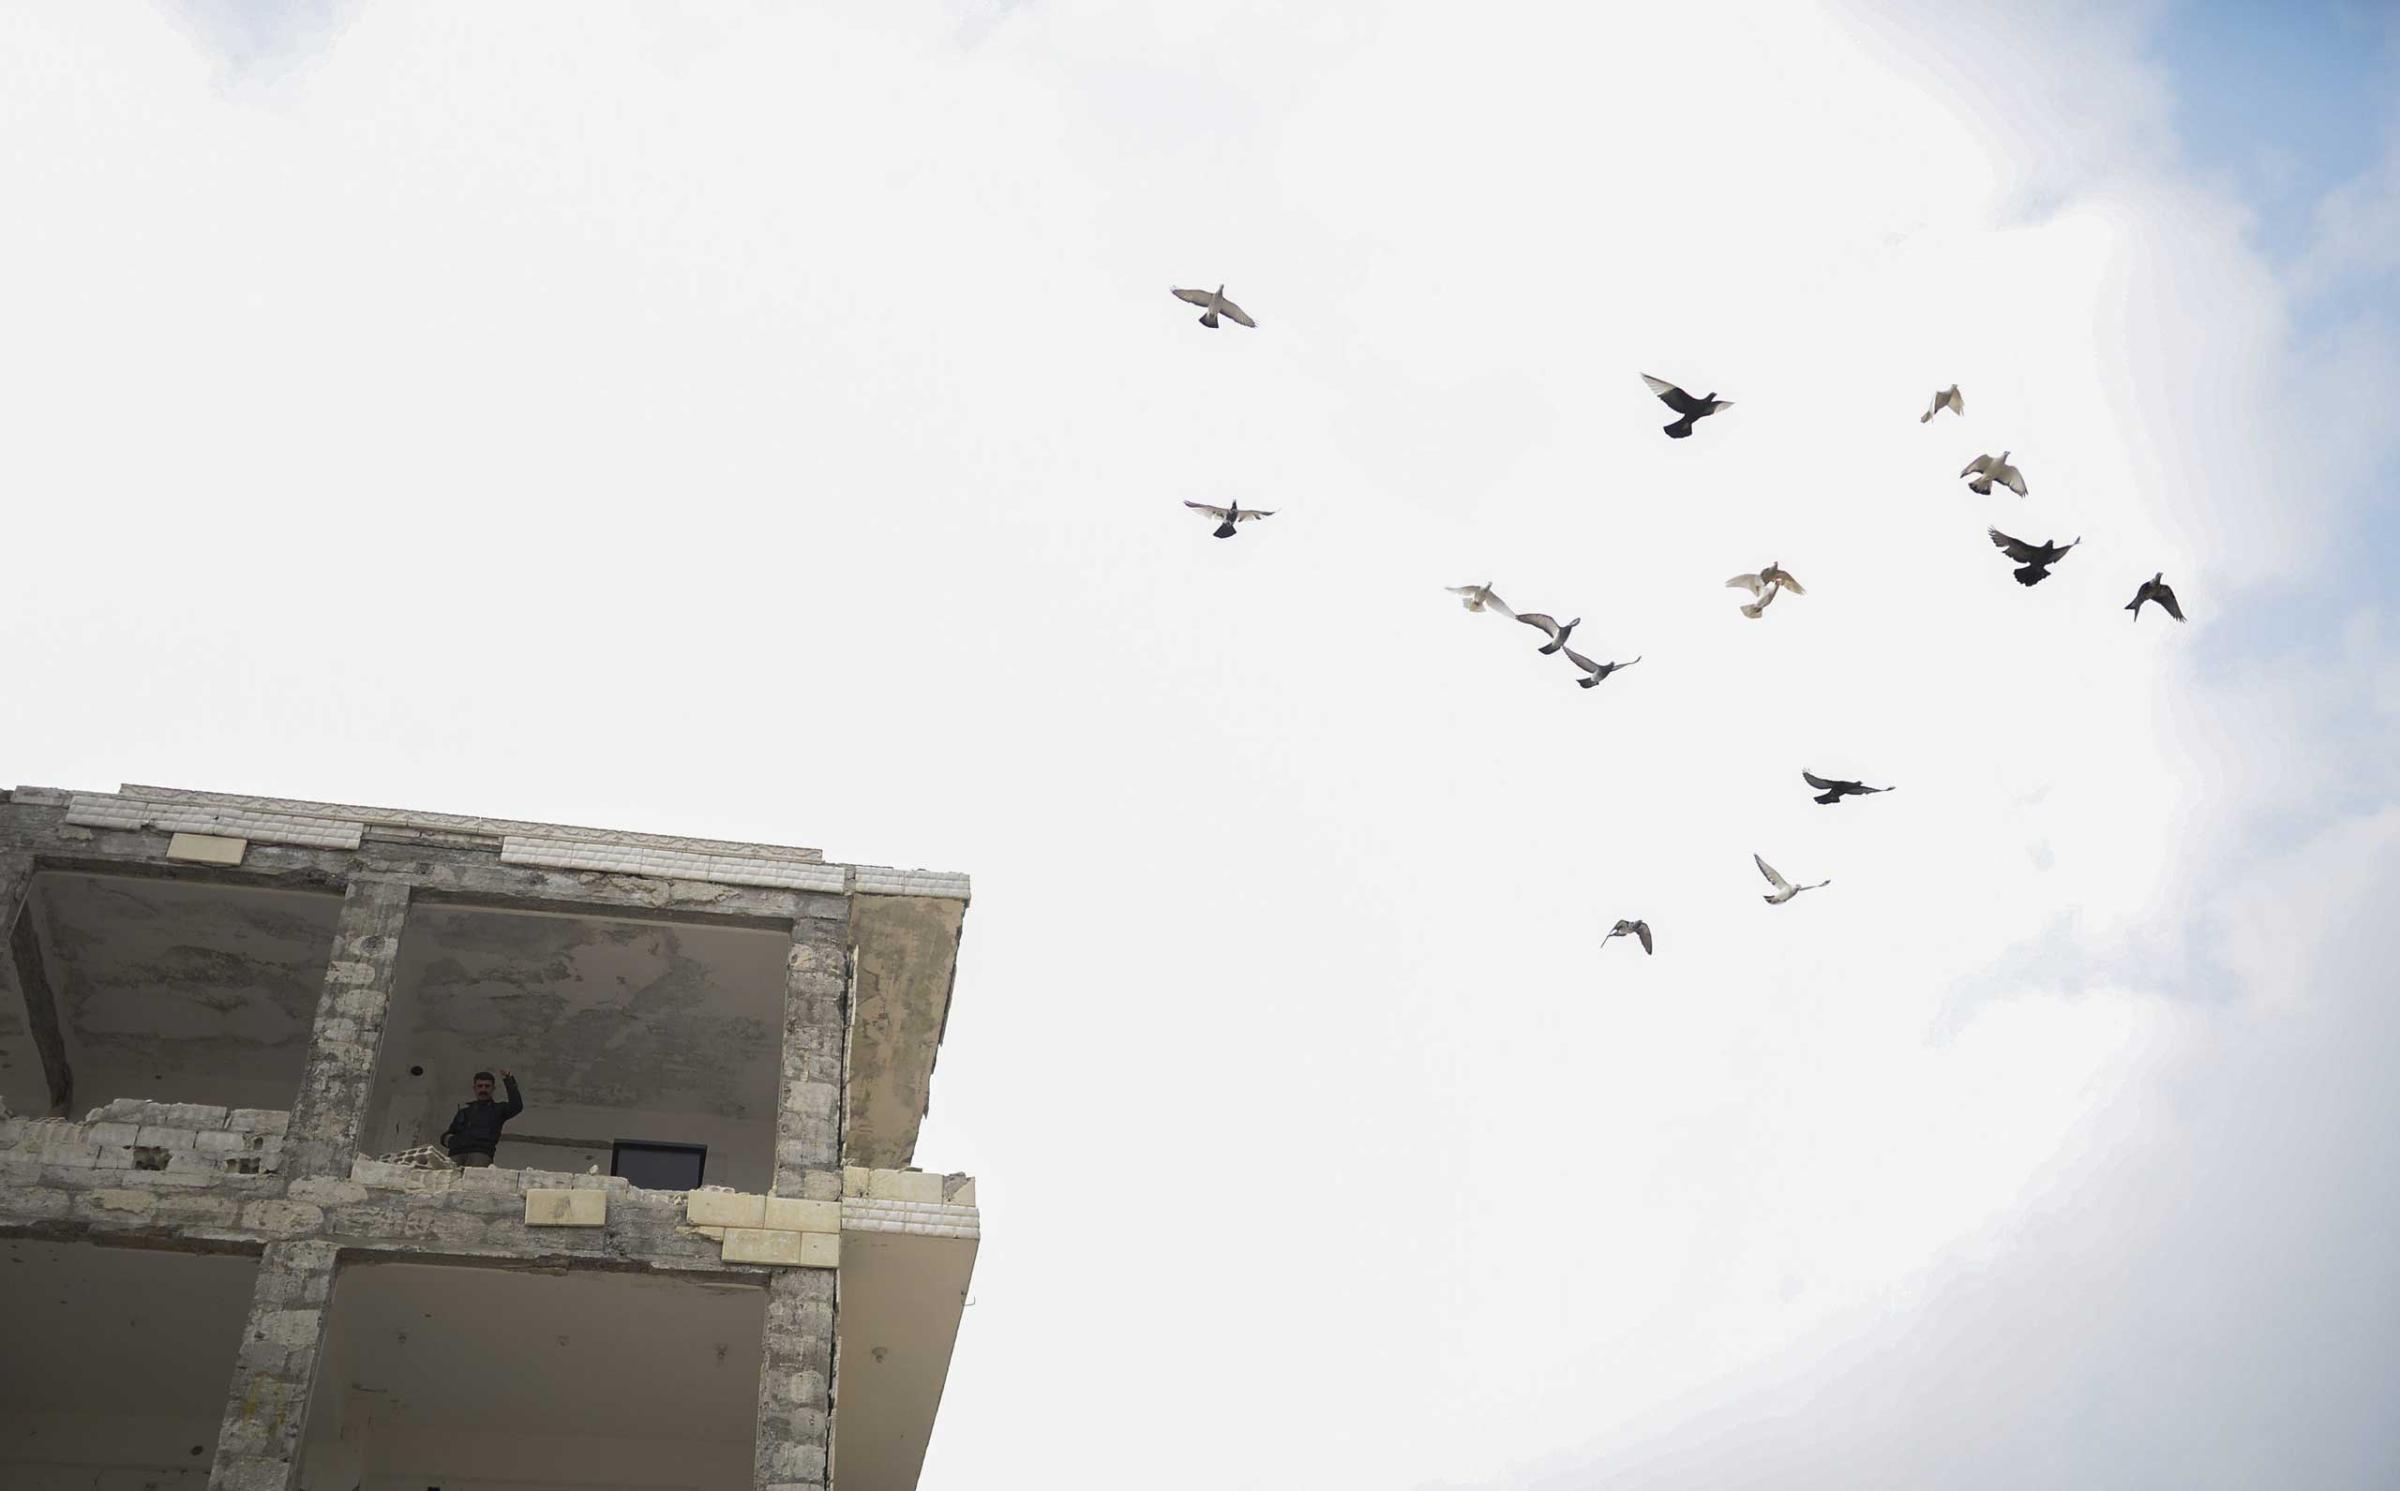 A Kurd stands in a building as pigeons fly over in the center of Kobani, on Jan. 28, 2015.